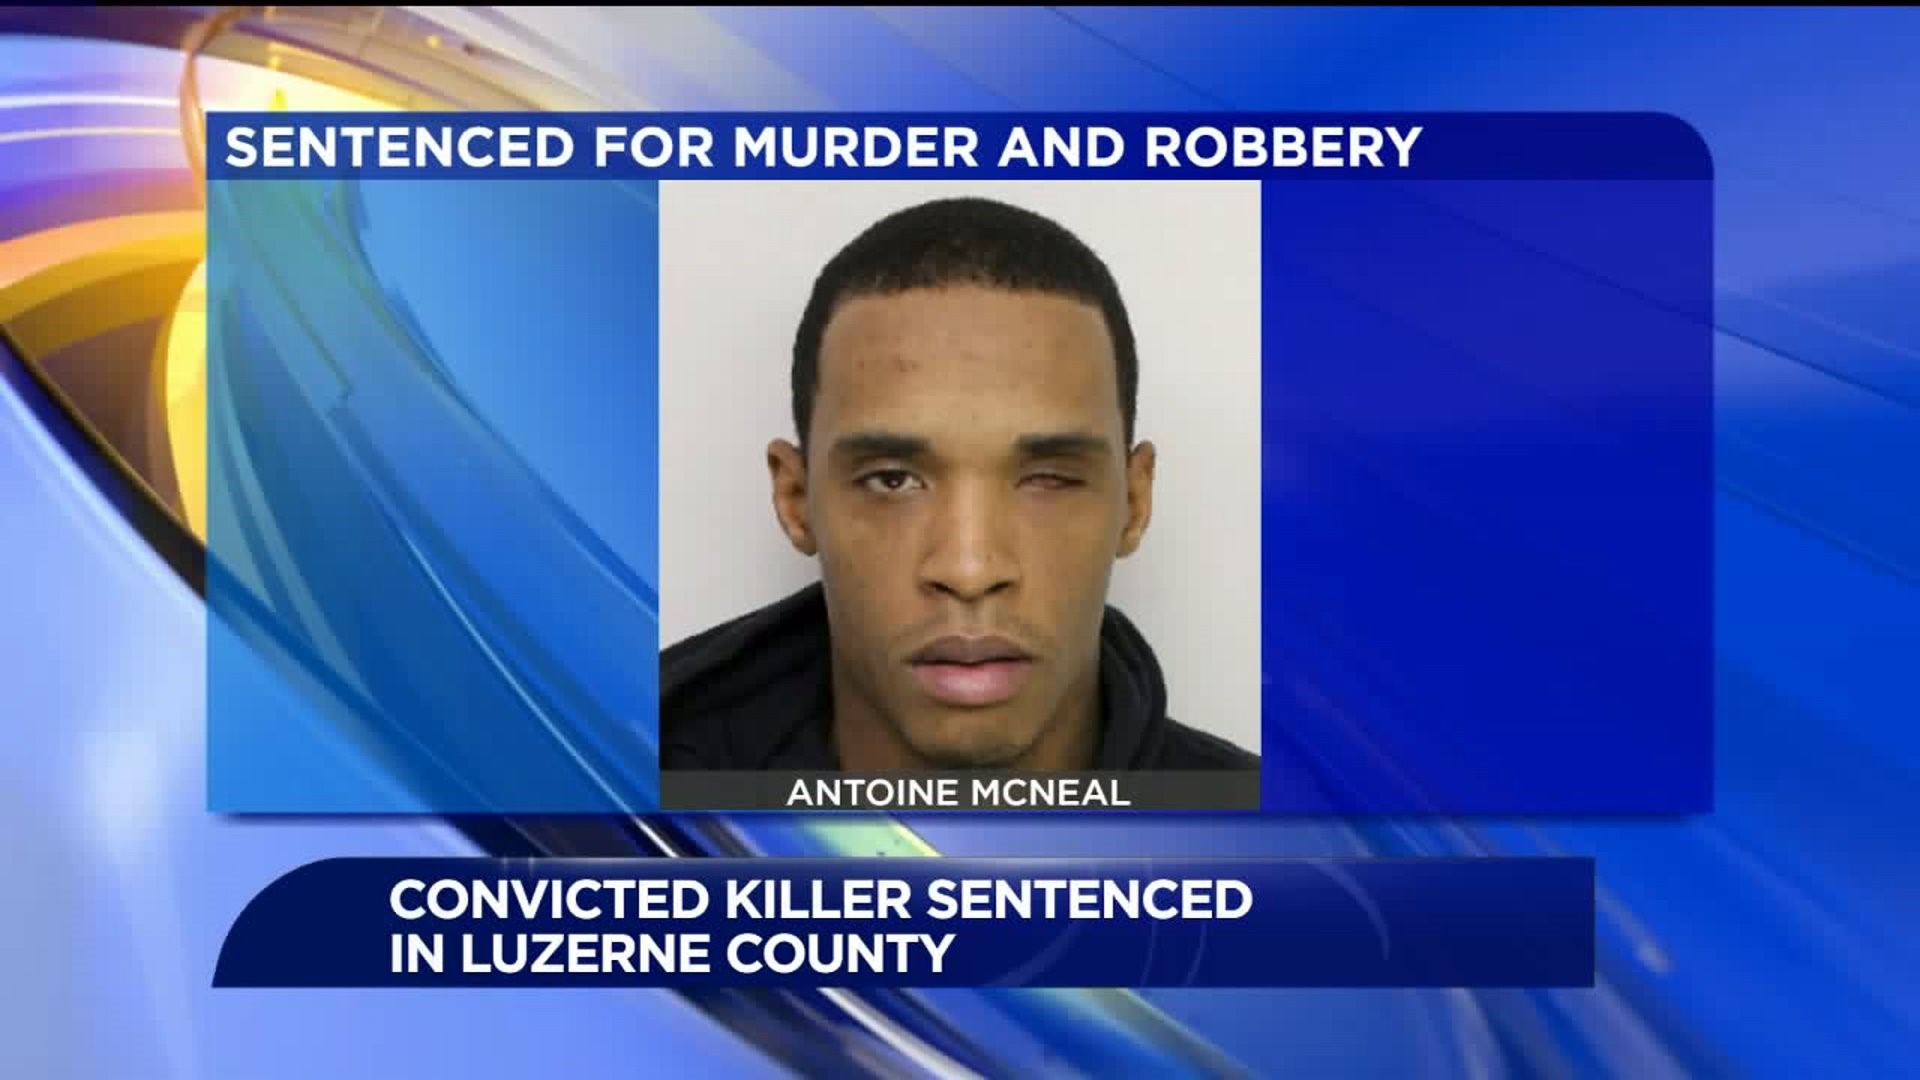 Convicted Killer Sentenced in Luzerne County